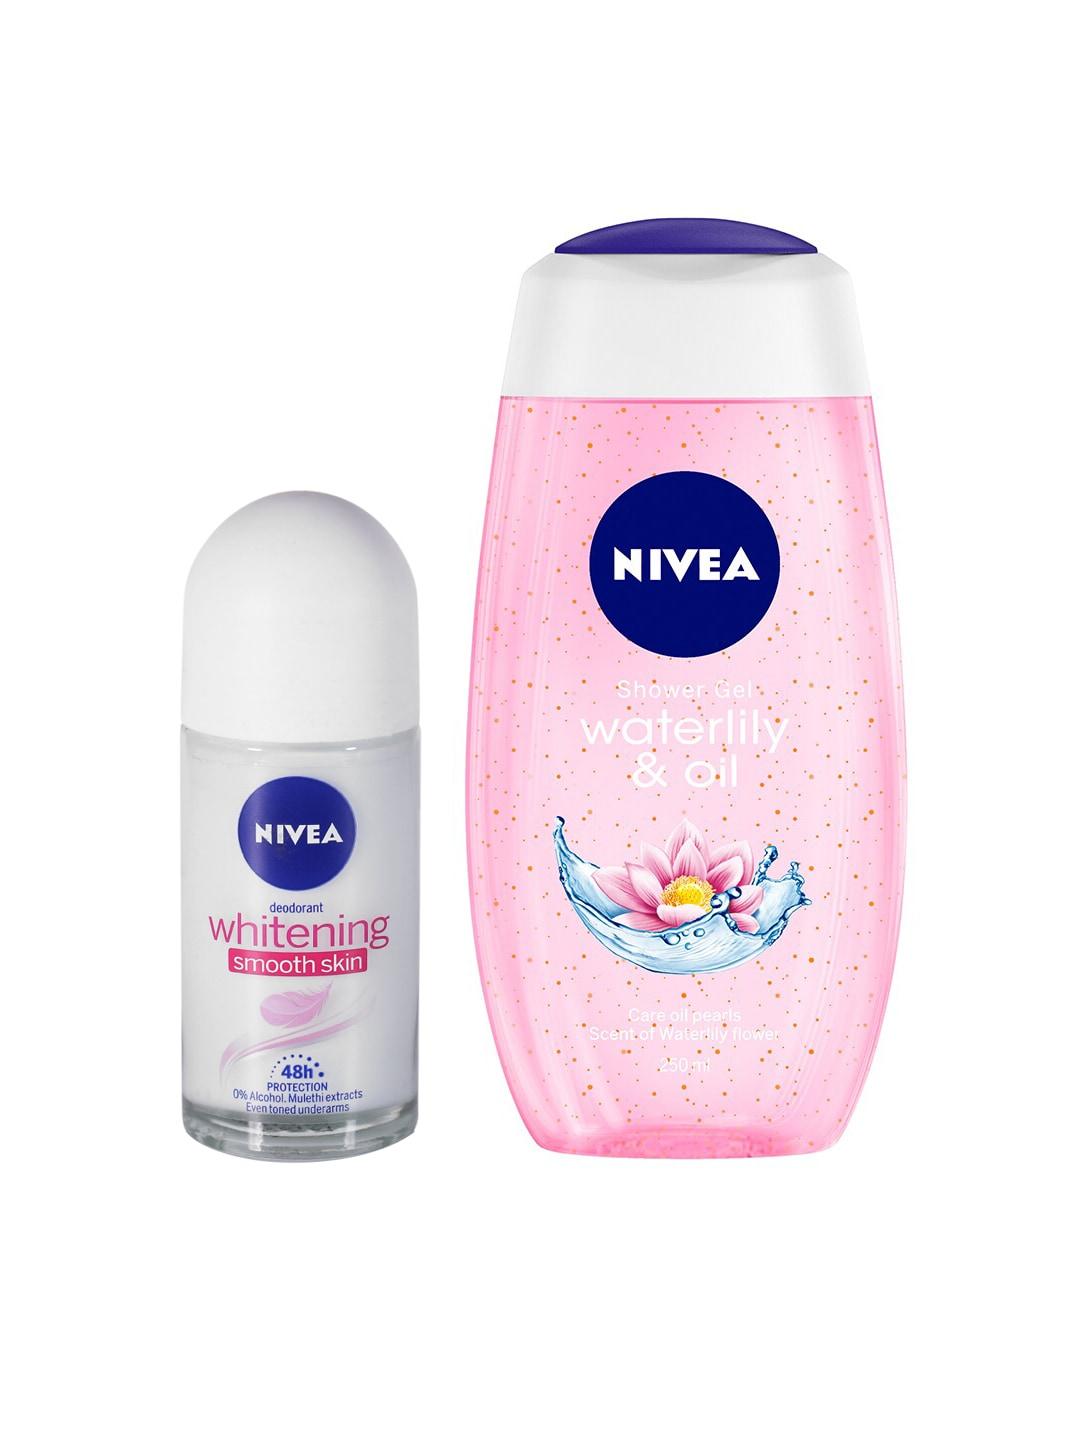 nivea set of waterlily & oil shower gel with whitening smooth skin roll-on deodorant